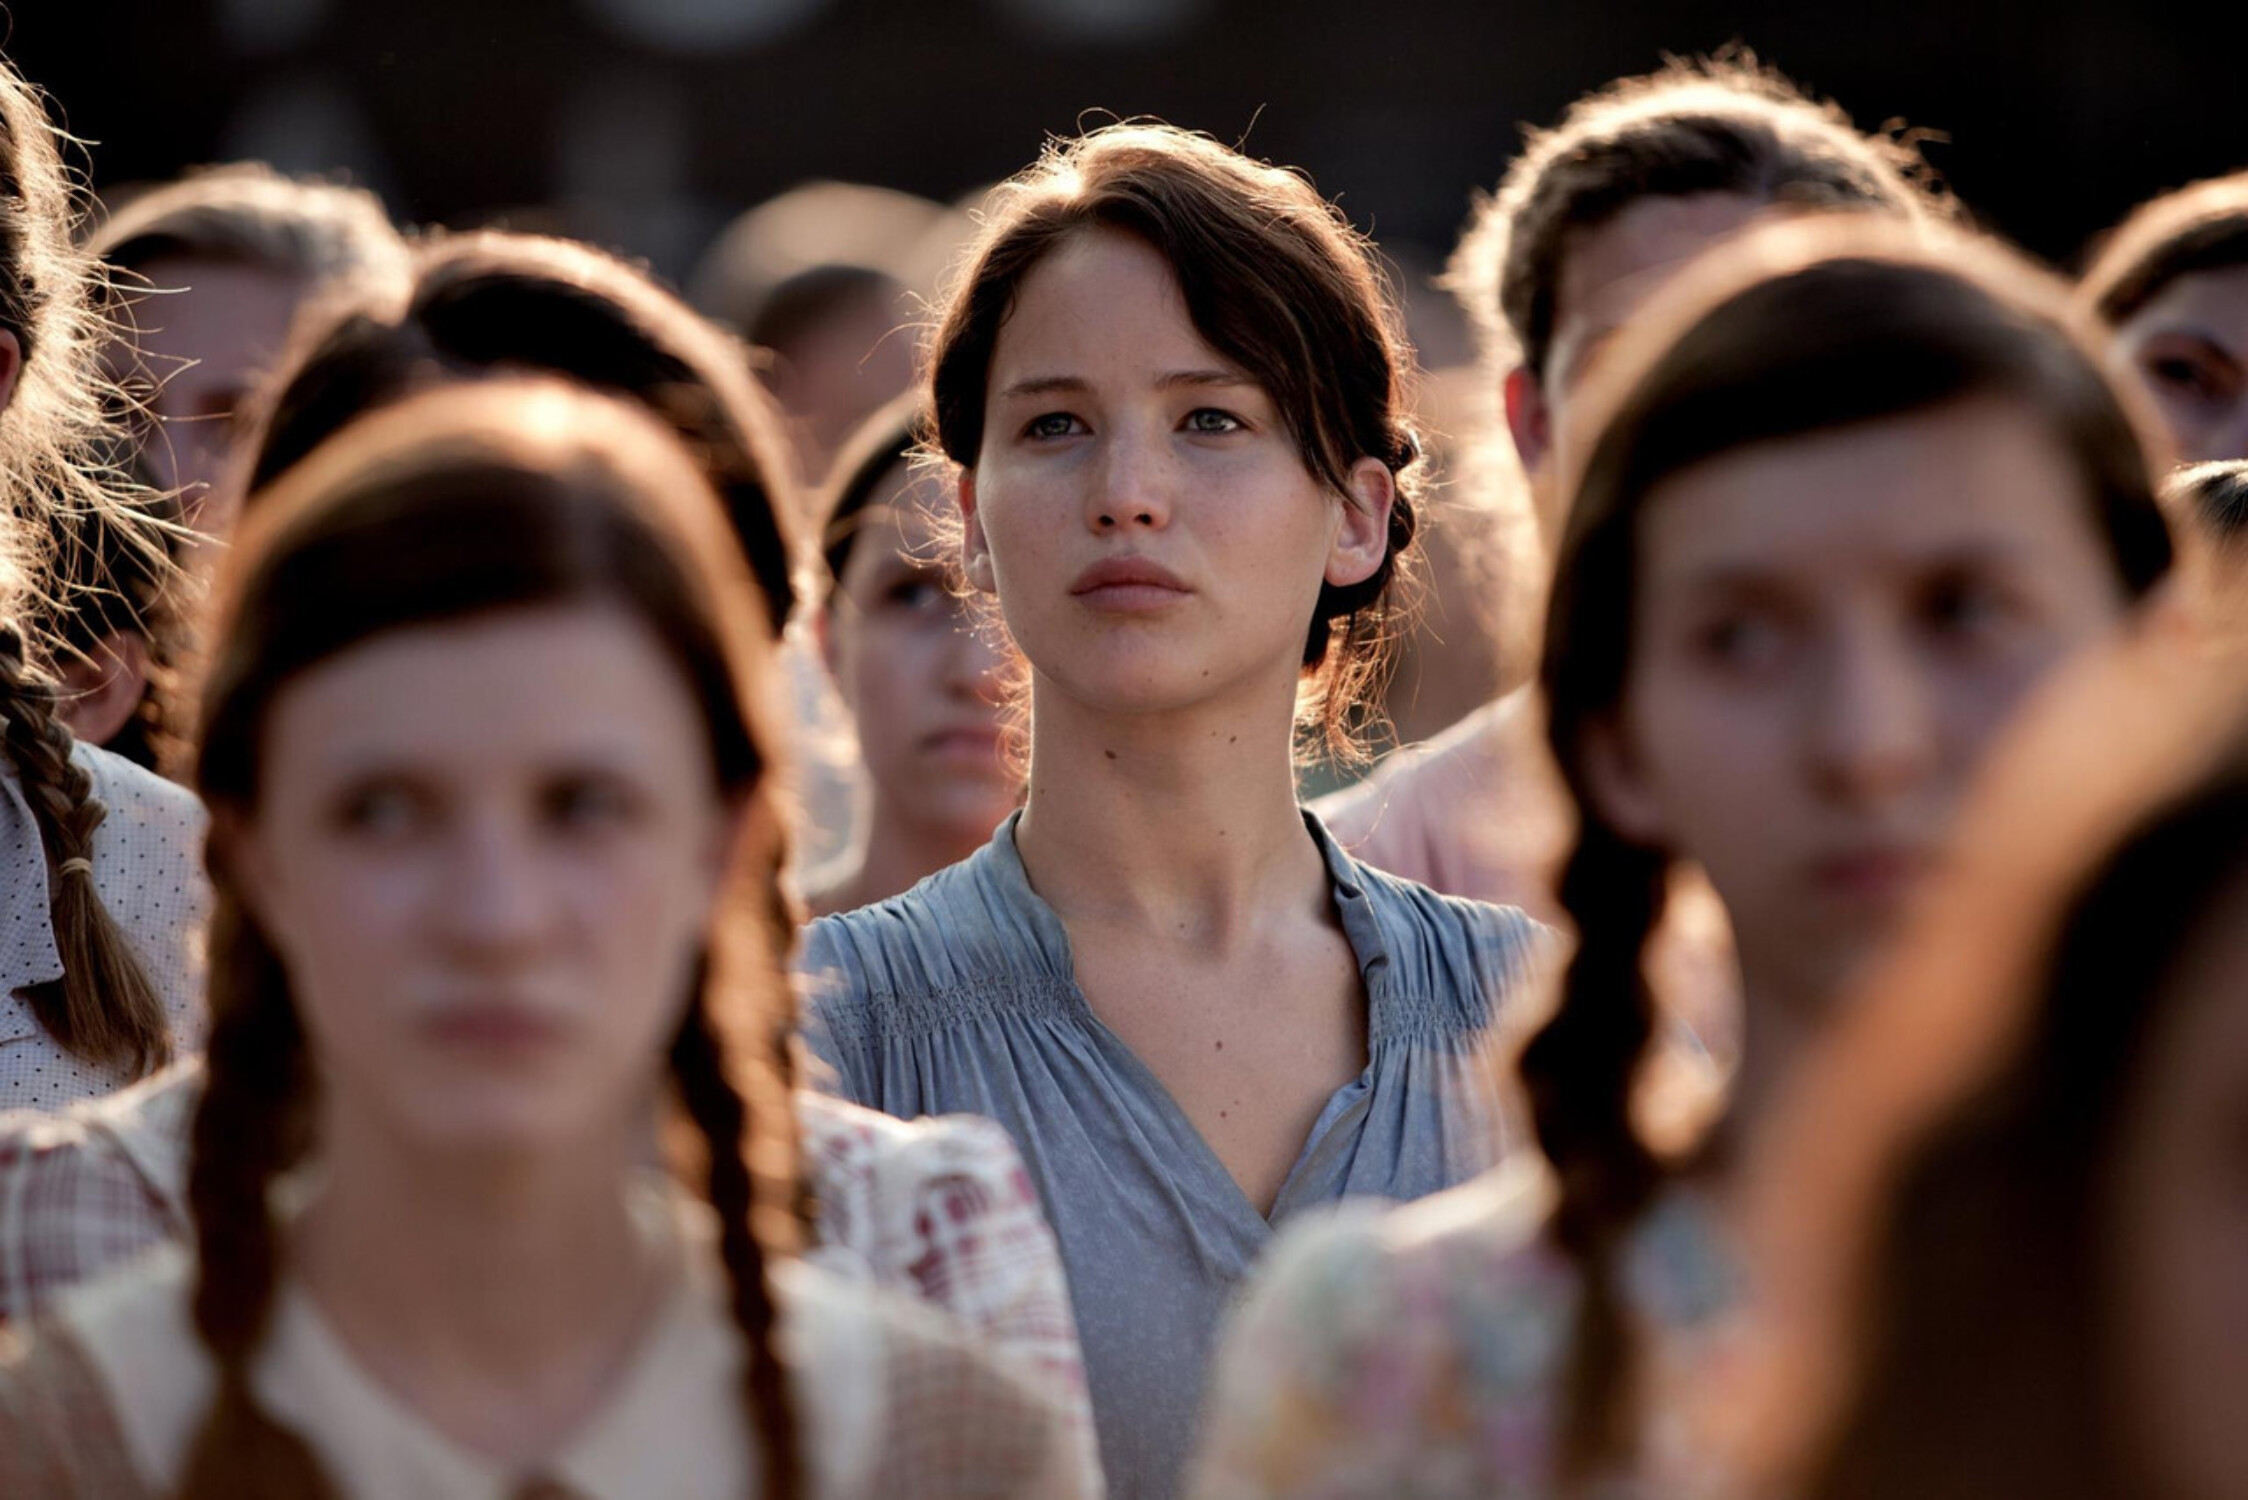 The Hunger Games (DVD + Digital Copy), Lions Gate, Sci-Fi & Fantasy - image 3 of 9